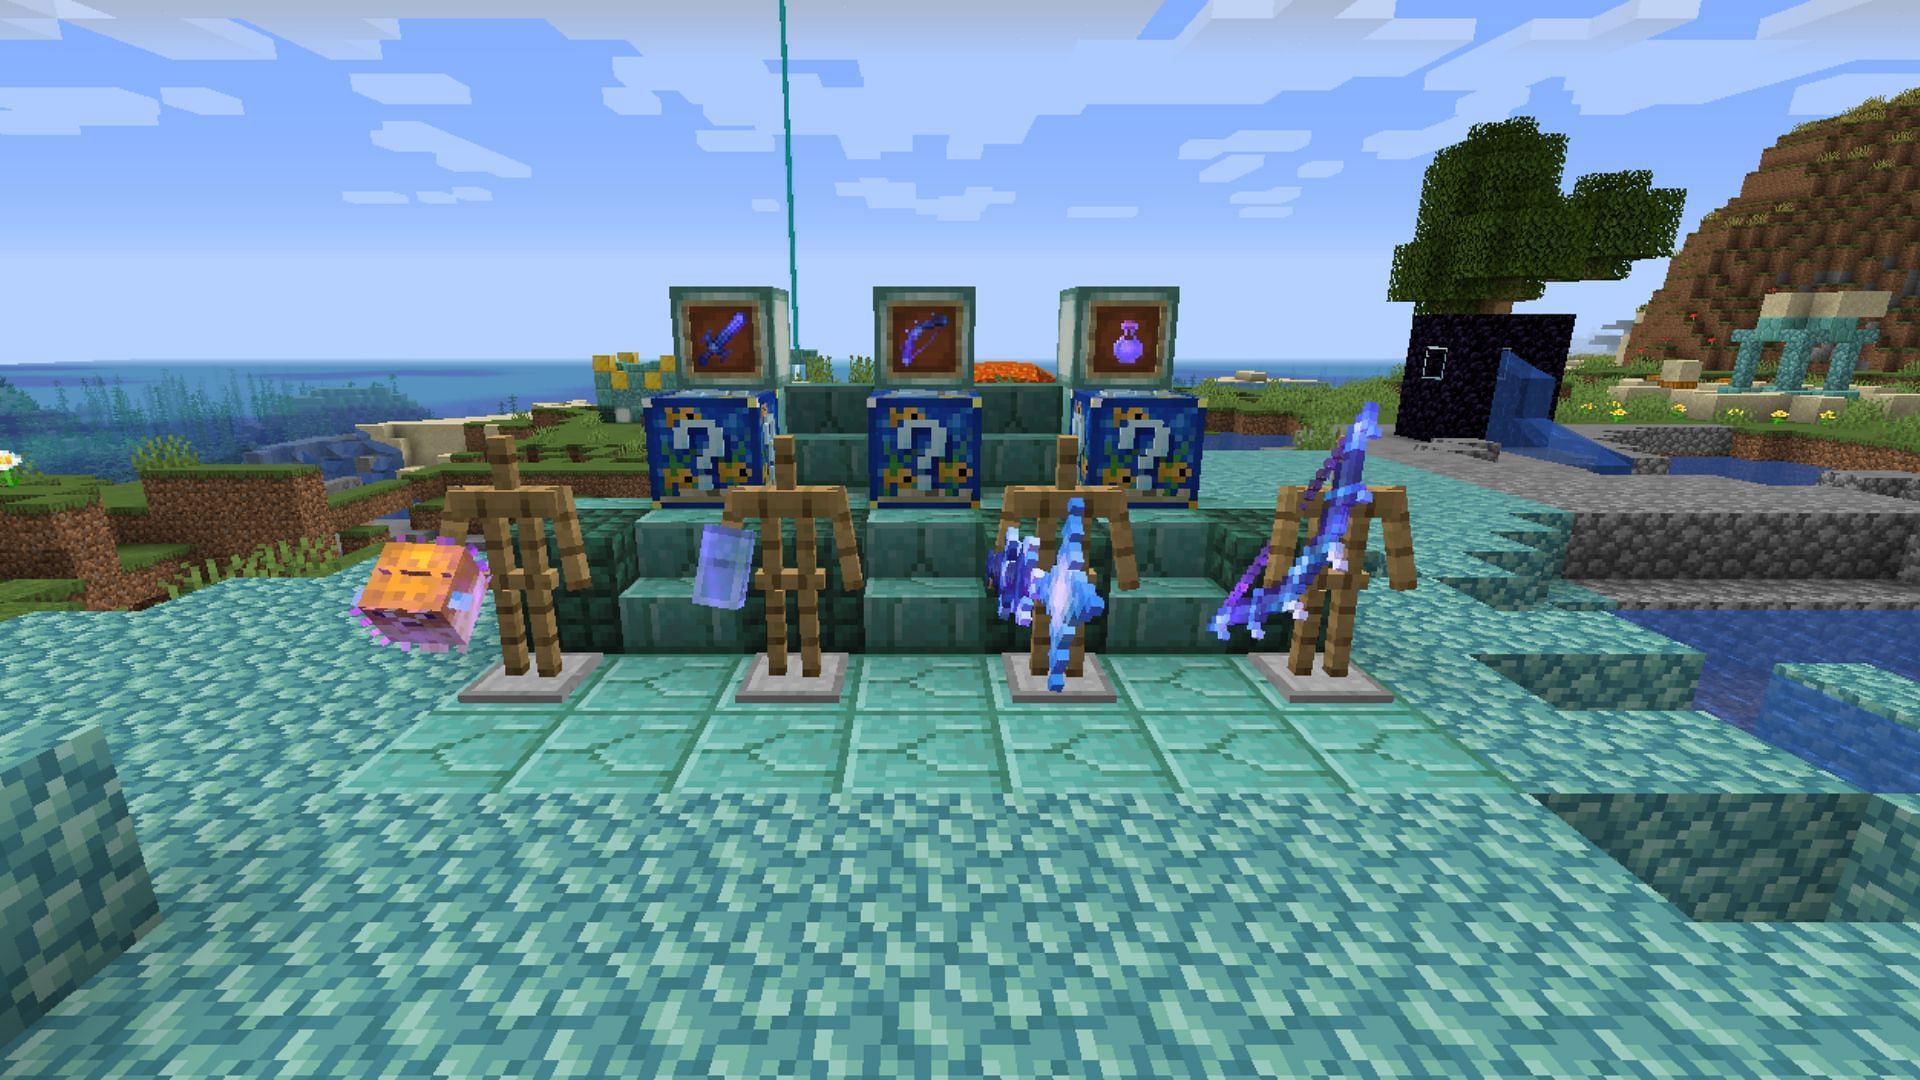 Fish Lucky Block gives players new water items and gear in Minecraft (Image via CurseForge)